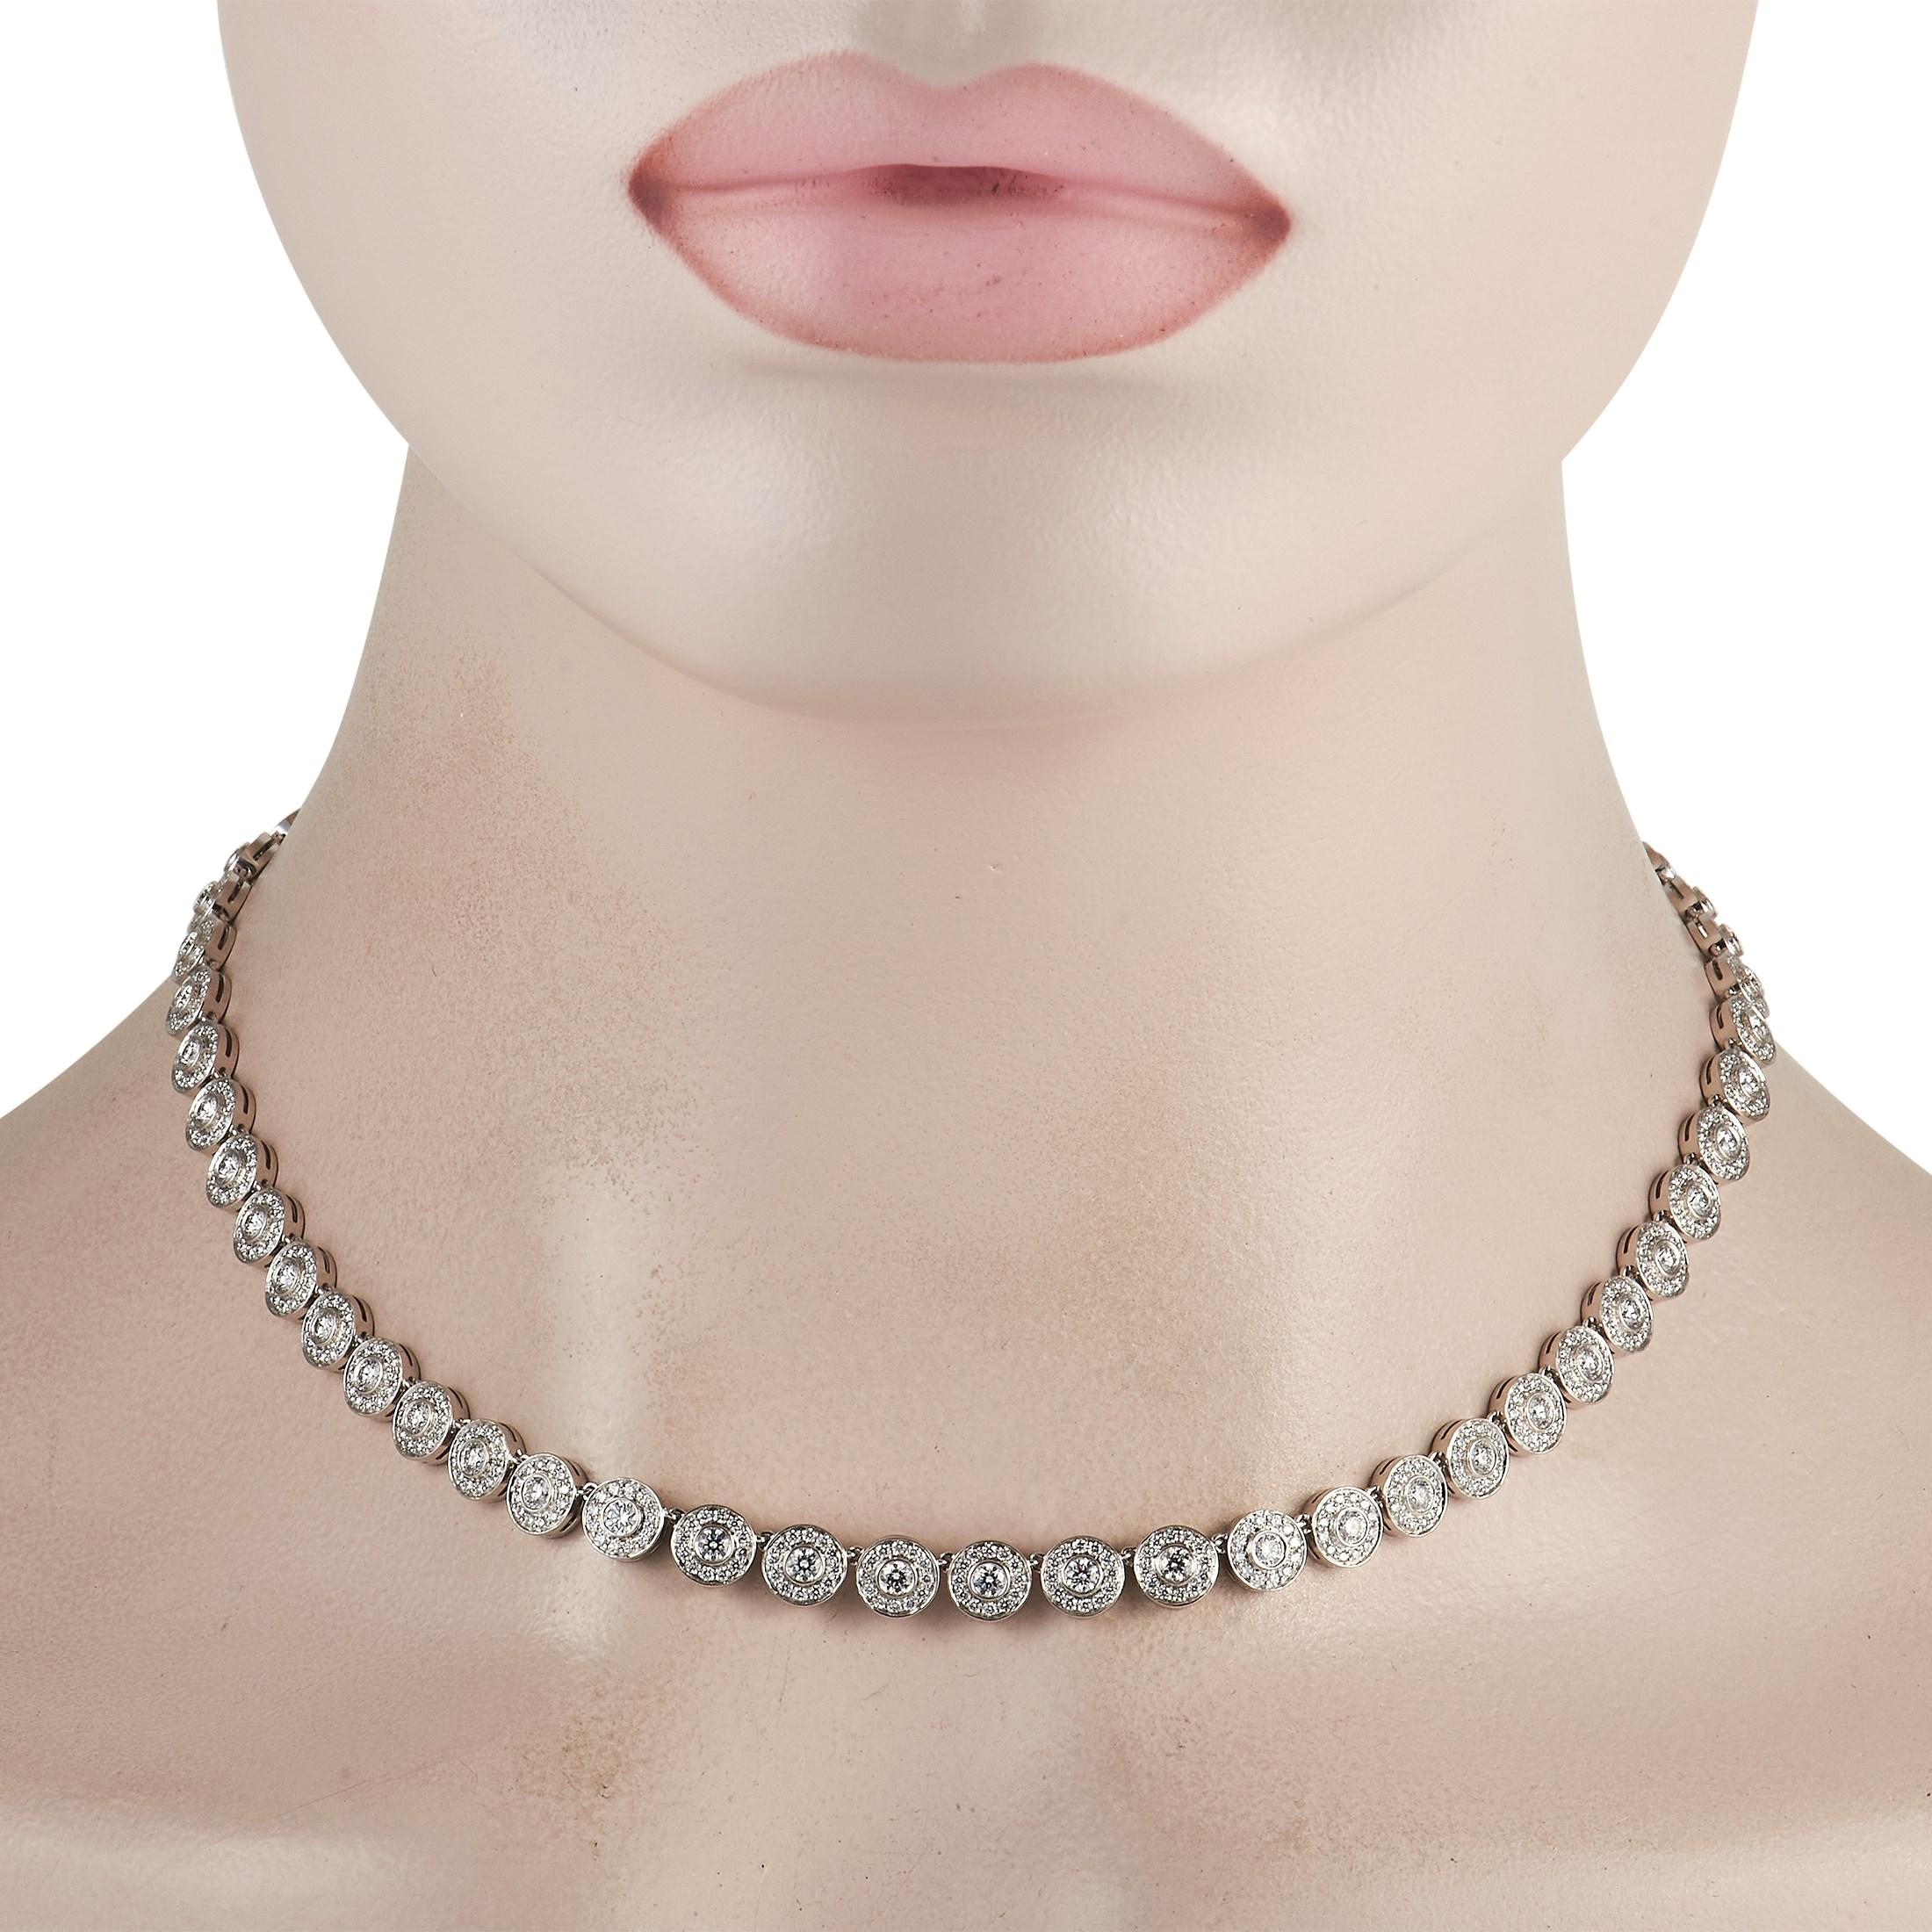 From Tiffany & Co.'s Circlet collection is this gorgeous necklace with a sparkling circle motif. It features a 16.5 inches long series of discs, each adorned with a single brilliant-cut diamond at the center. Surrounding each center diamond on each